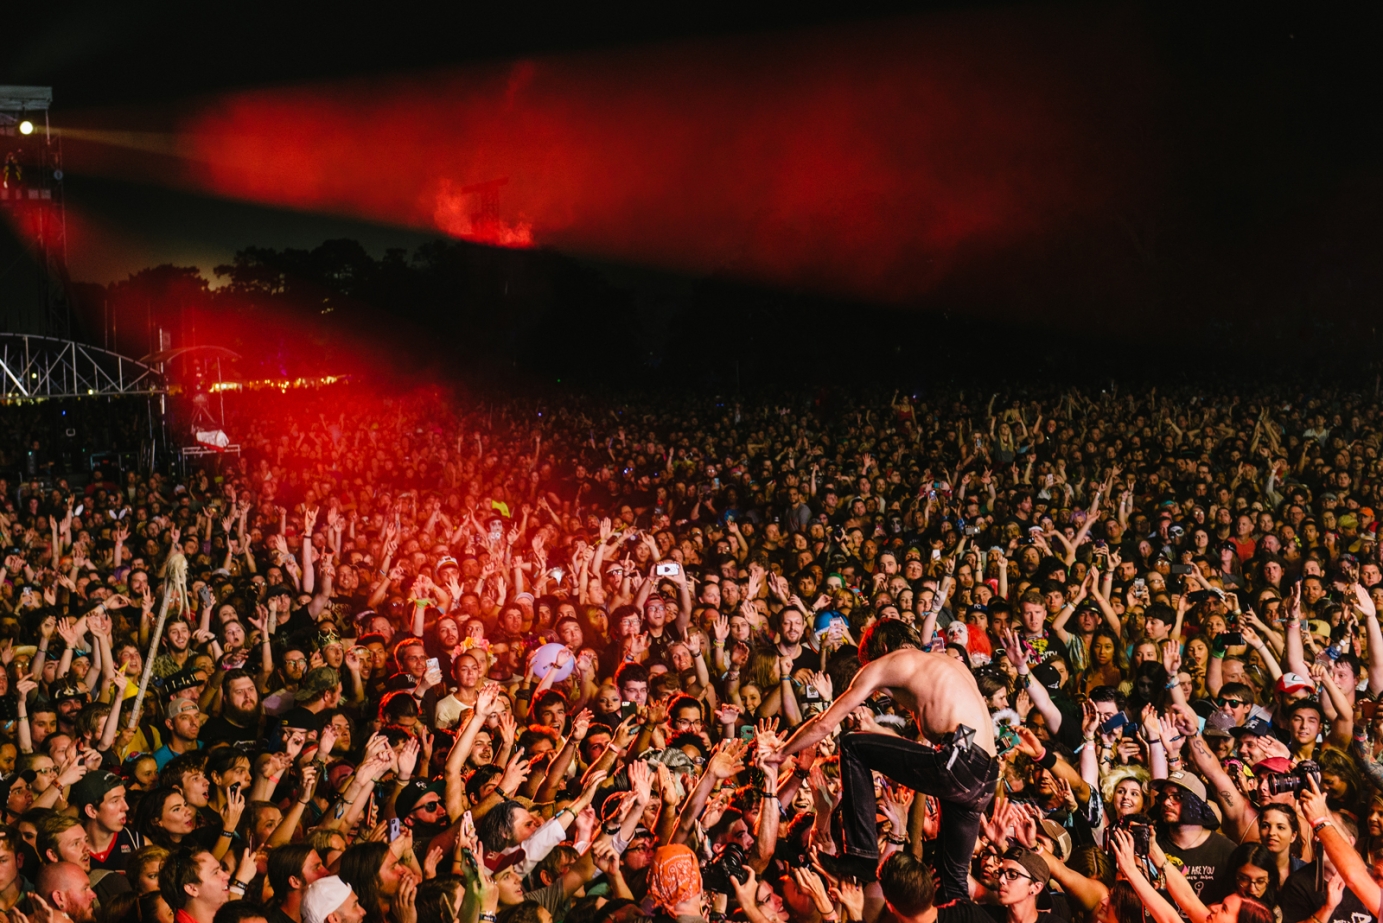 Photography for Cage the Elephant by Andy Sawyer